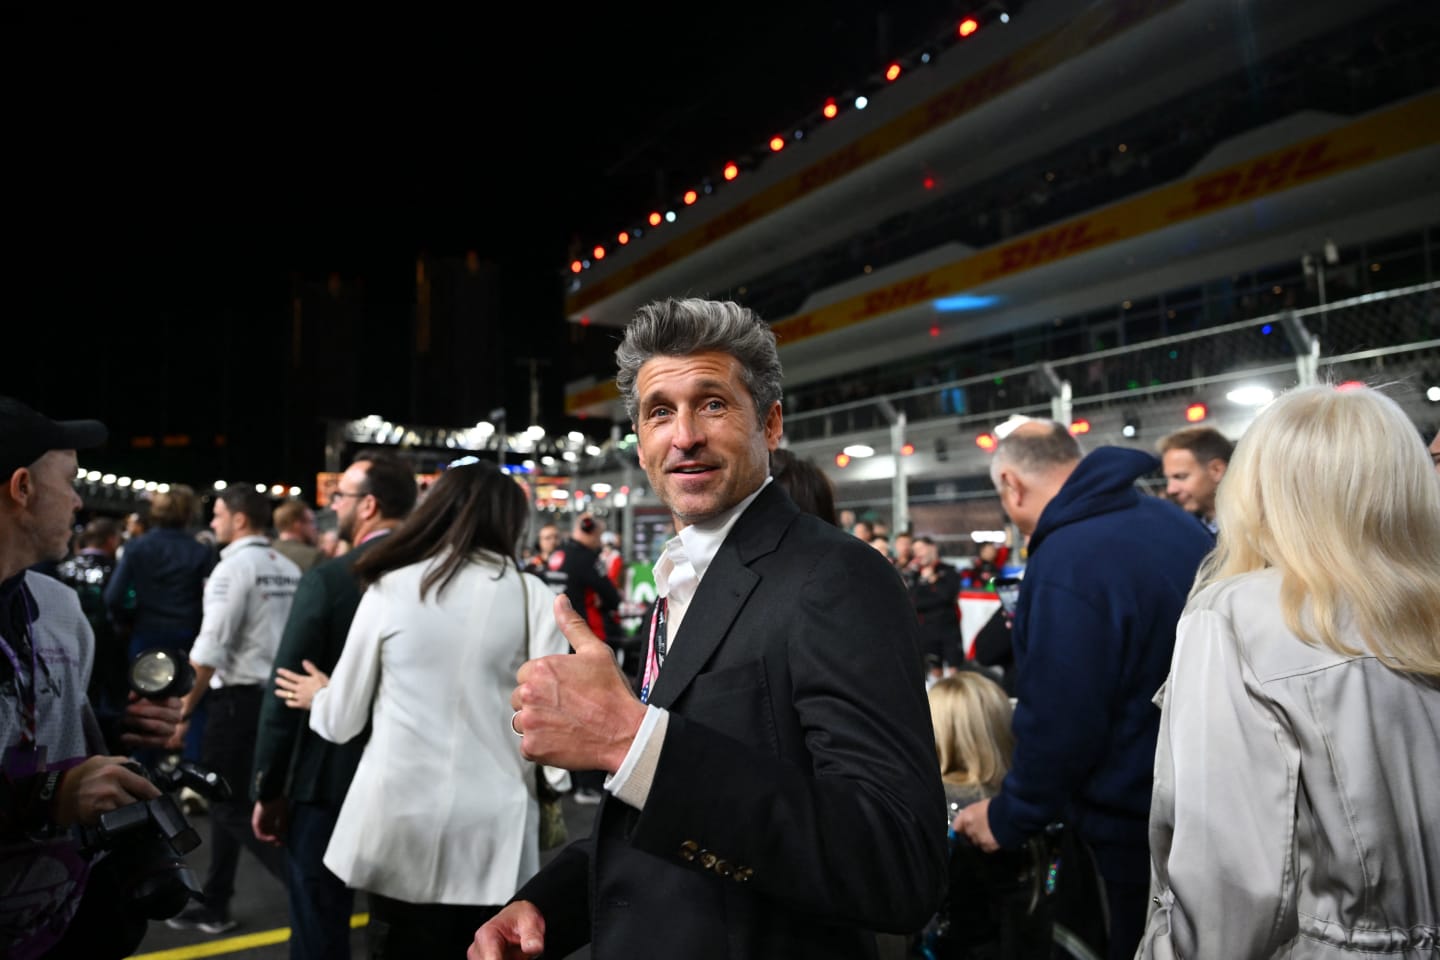 Actor Patrick Dempsey tours the grid before the start of the Las Vegas Formula One Grand Prix on November 18, 2023, in Las Vegas, Nevada. (Photo by ANGELA WEISS / AFP) (Photo by ANGELA WEISS/AFP via Getty Images)